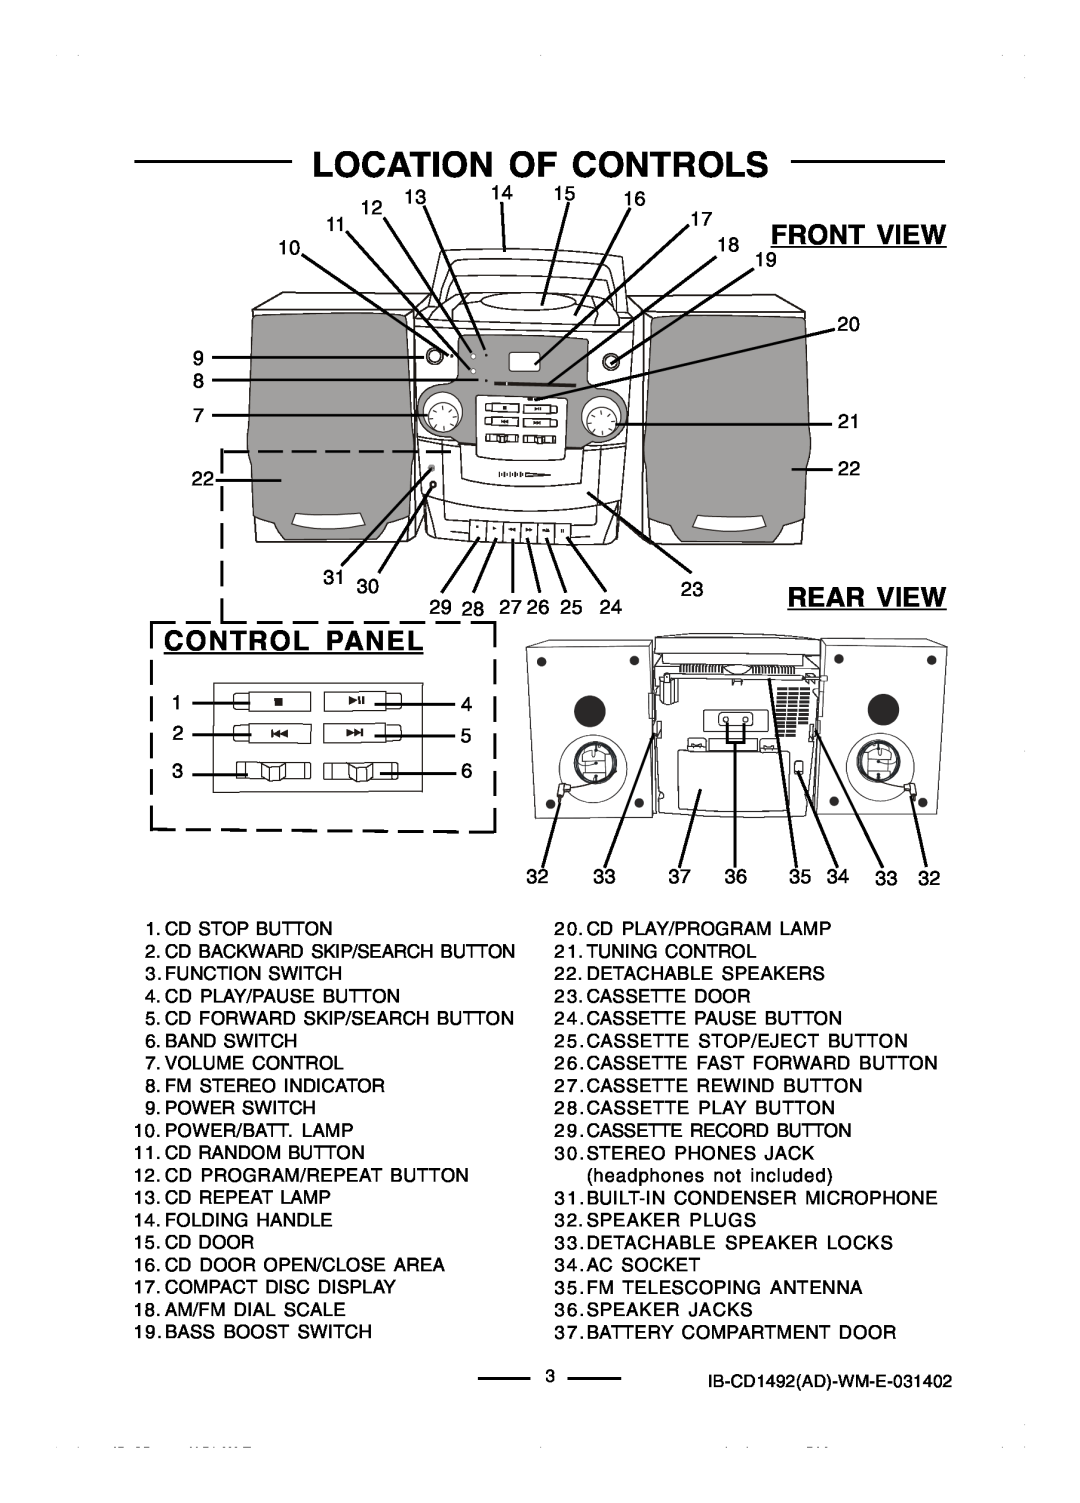 Lenoxx Electronics CD-1492 operating instructions Location Of Controls, Front View, Rear View, Control Panel 